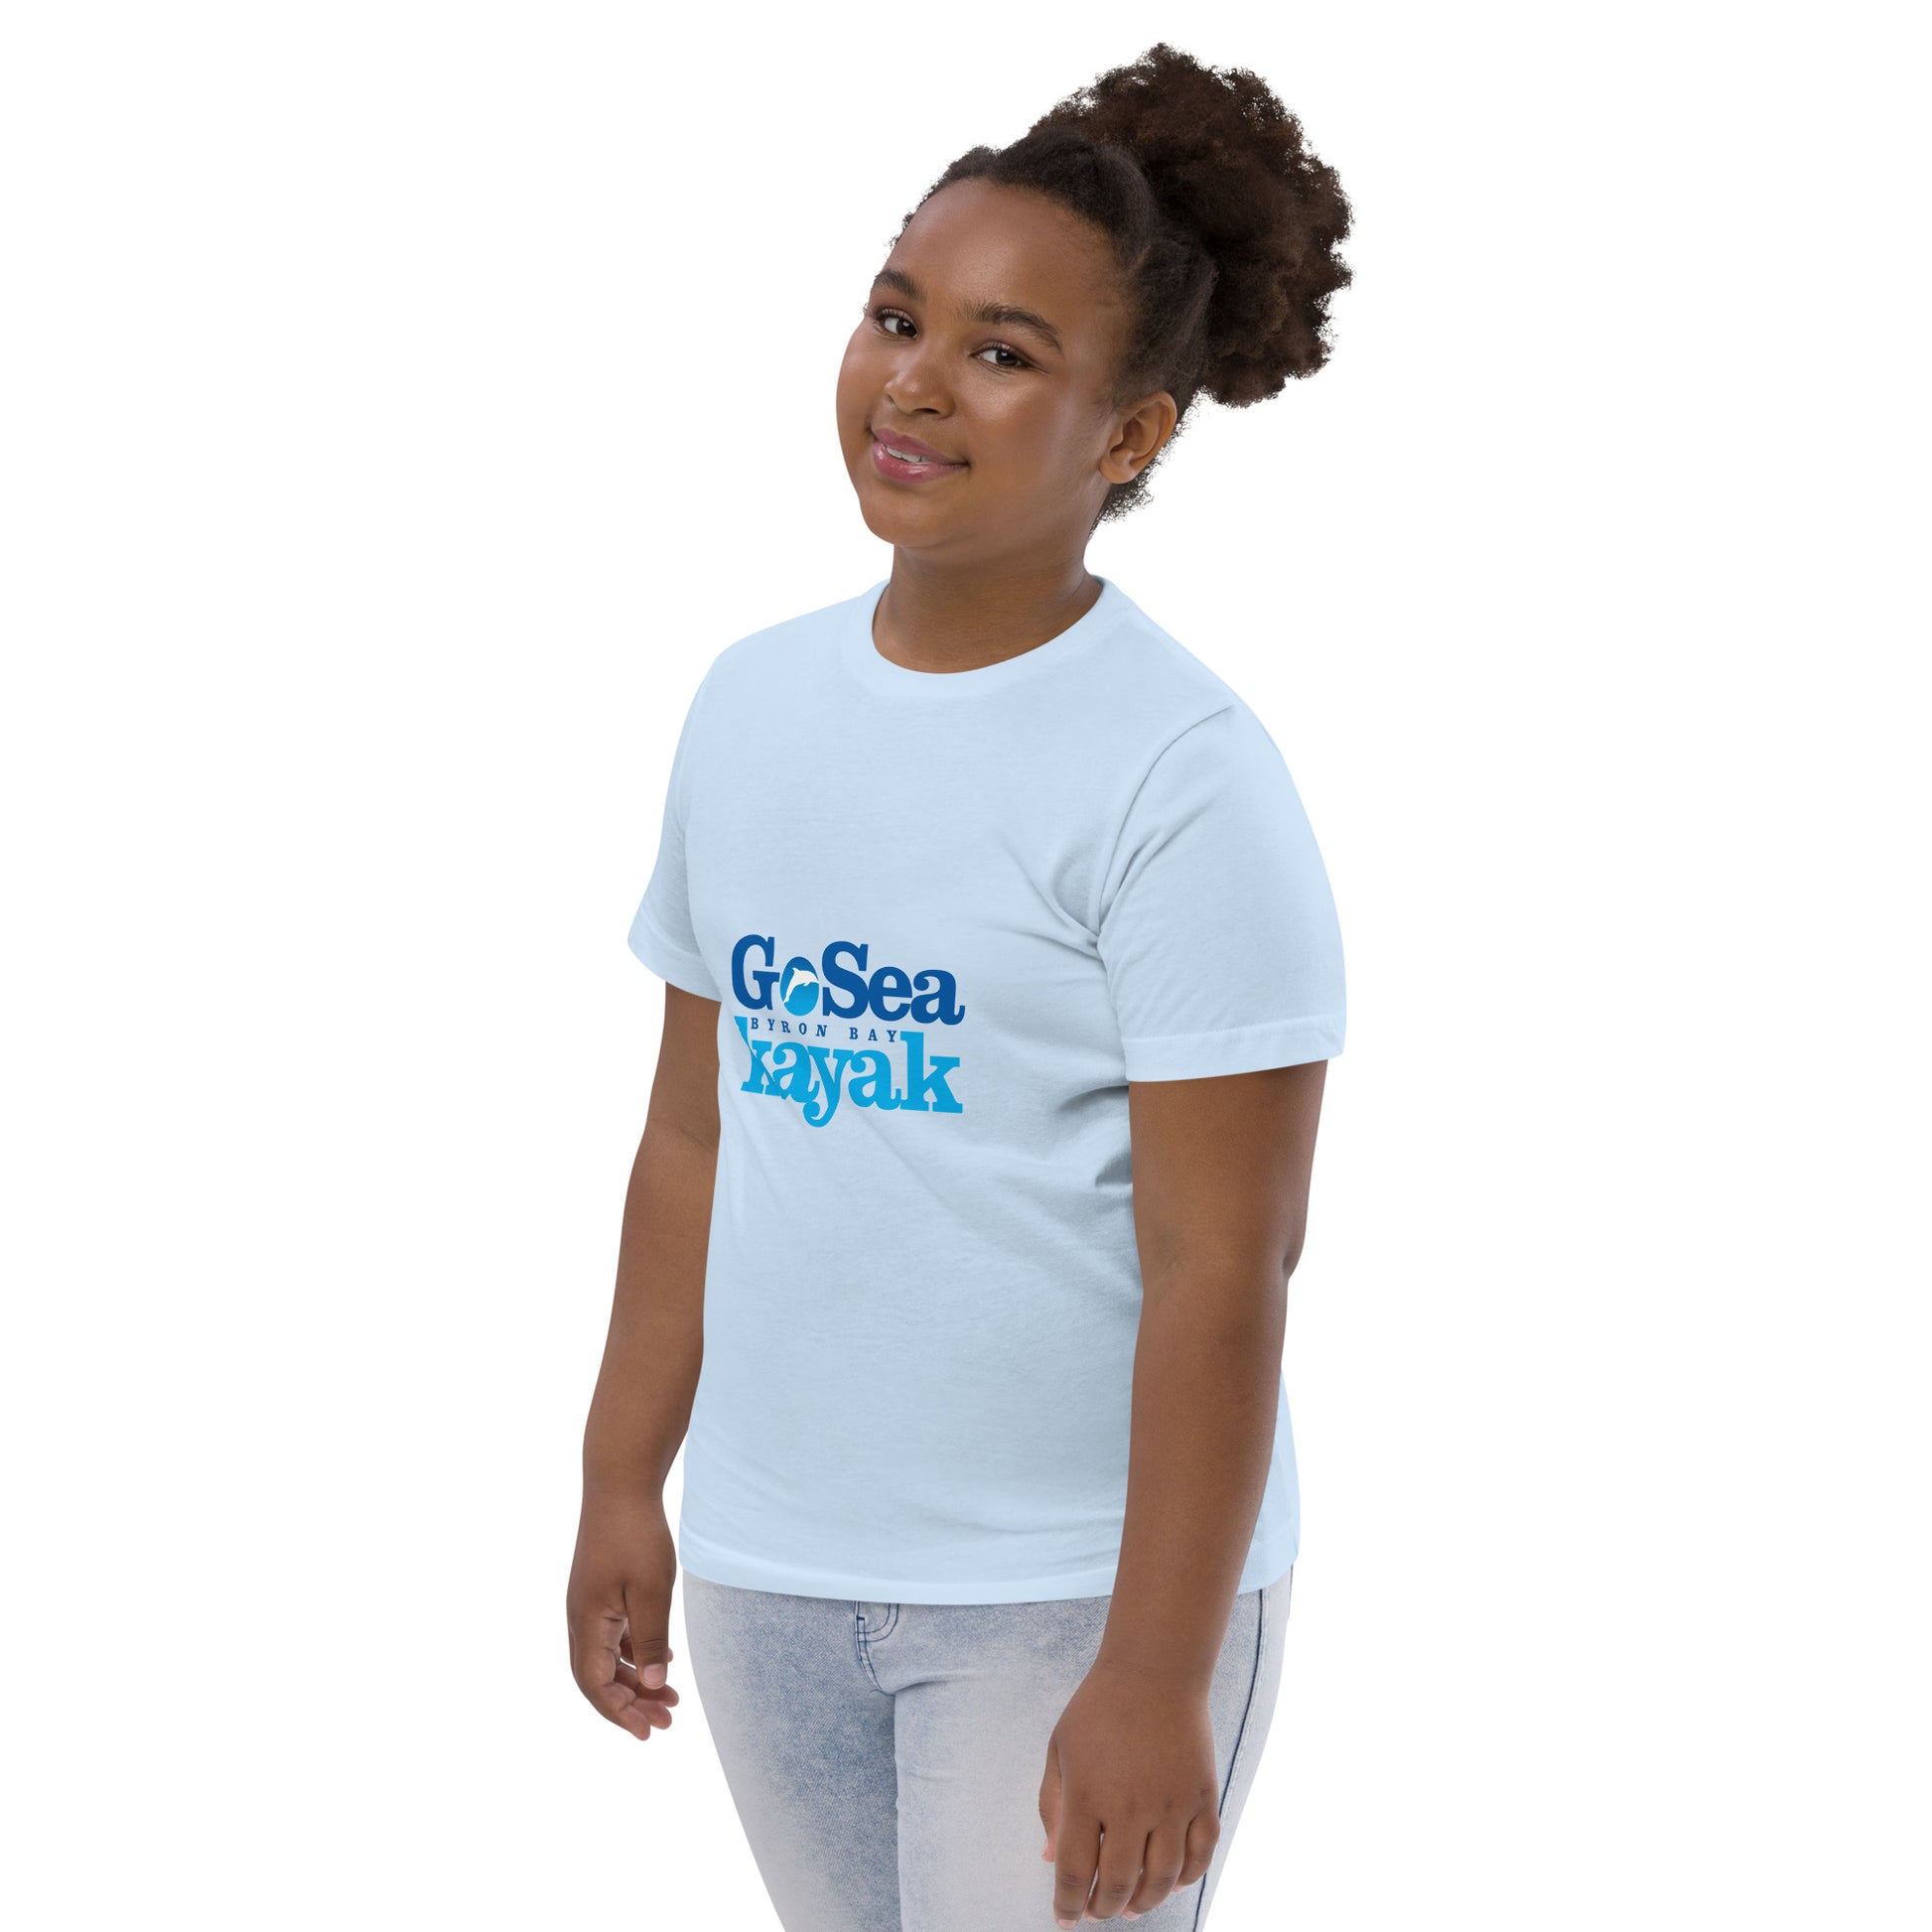  Kids T-Shirt - Light Blue - Side view, being warn on a girl standing with her arms by her side - Go Sea Kayak Byron Bay logo on front - Genuine Byron Bay Merchandise | Produced by Go Sea Kayak Byron Bay 